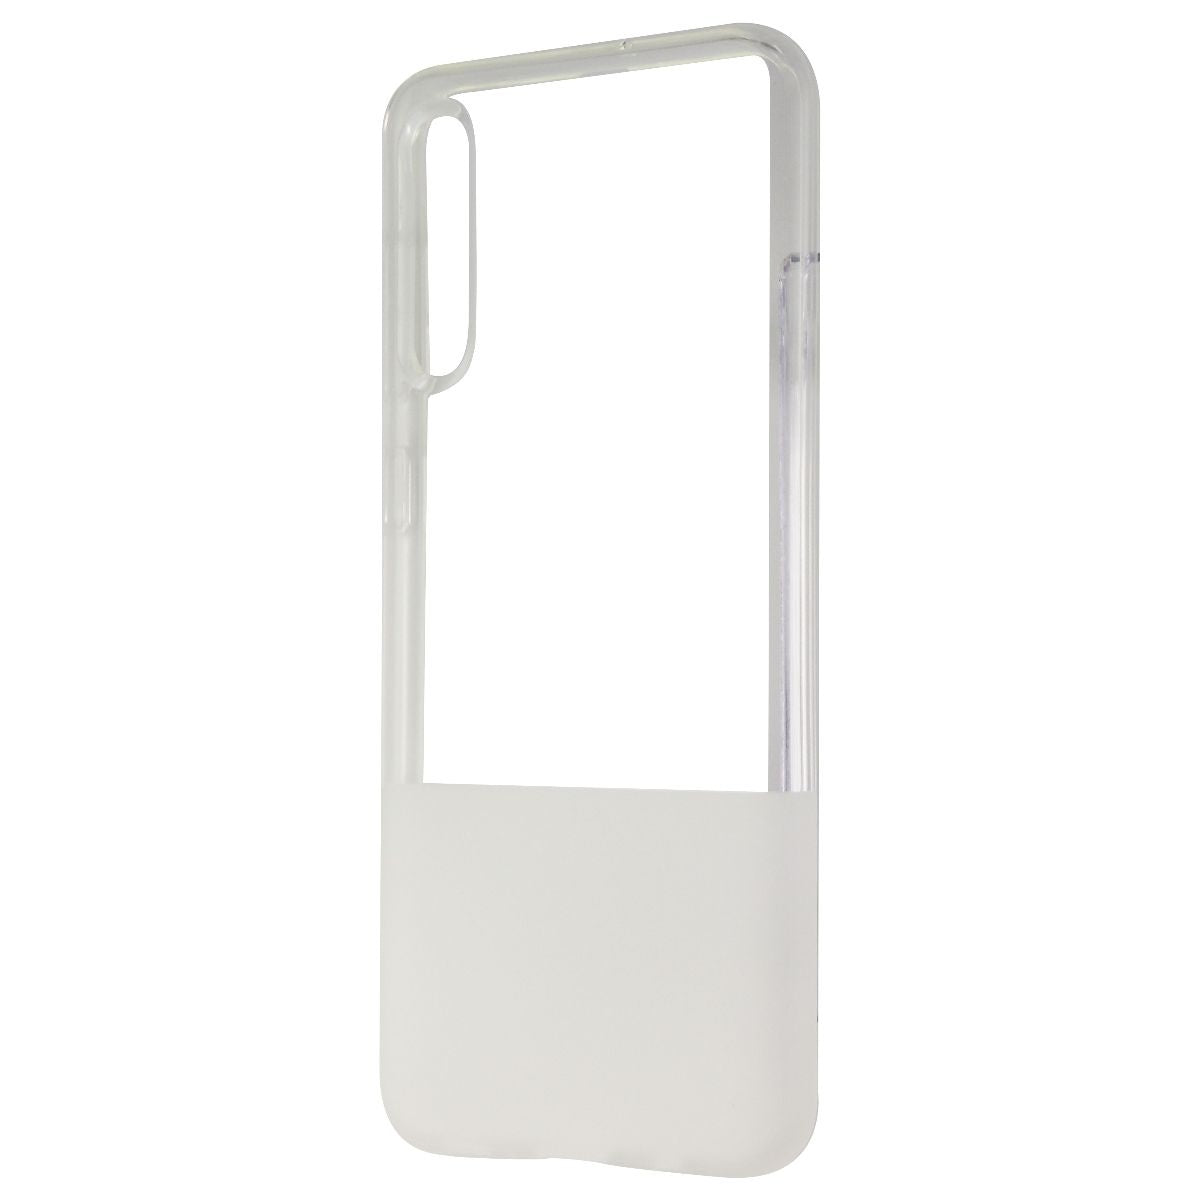 Incipio NGP Series Flexible Case for Samsung Galaxy A50 - Clear/Frost Cell Phone - Cases, Covers & Skins Incipio    - Simple Cell Bulk Wholesale Pricing - USA Seller